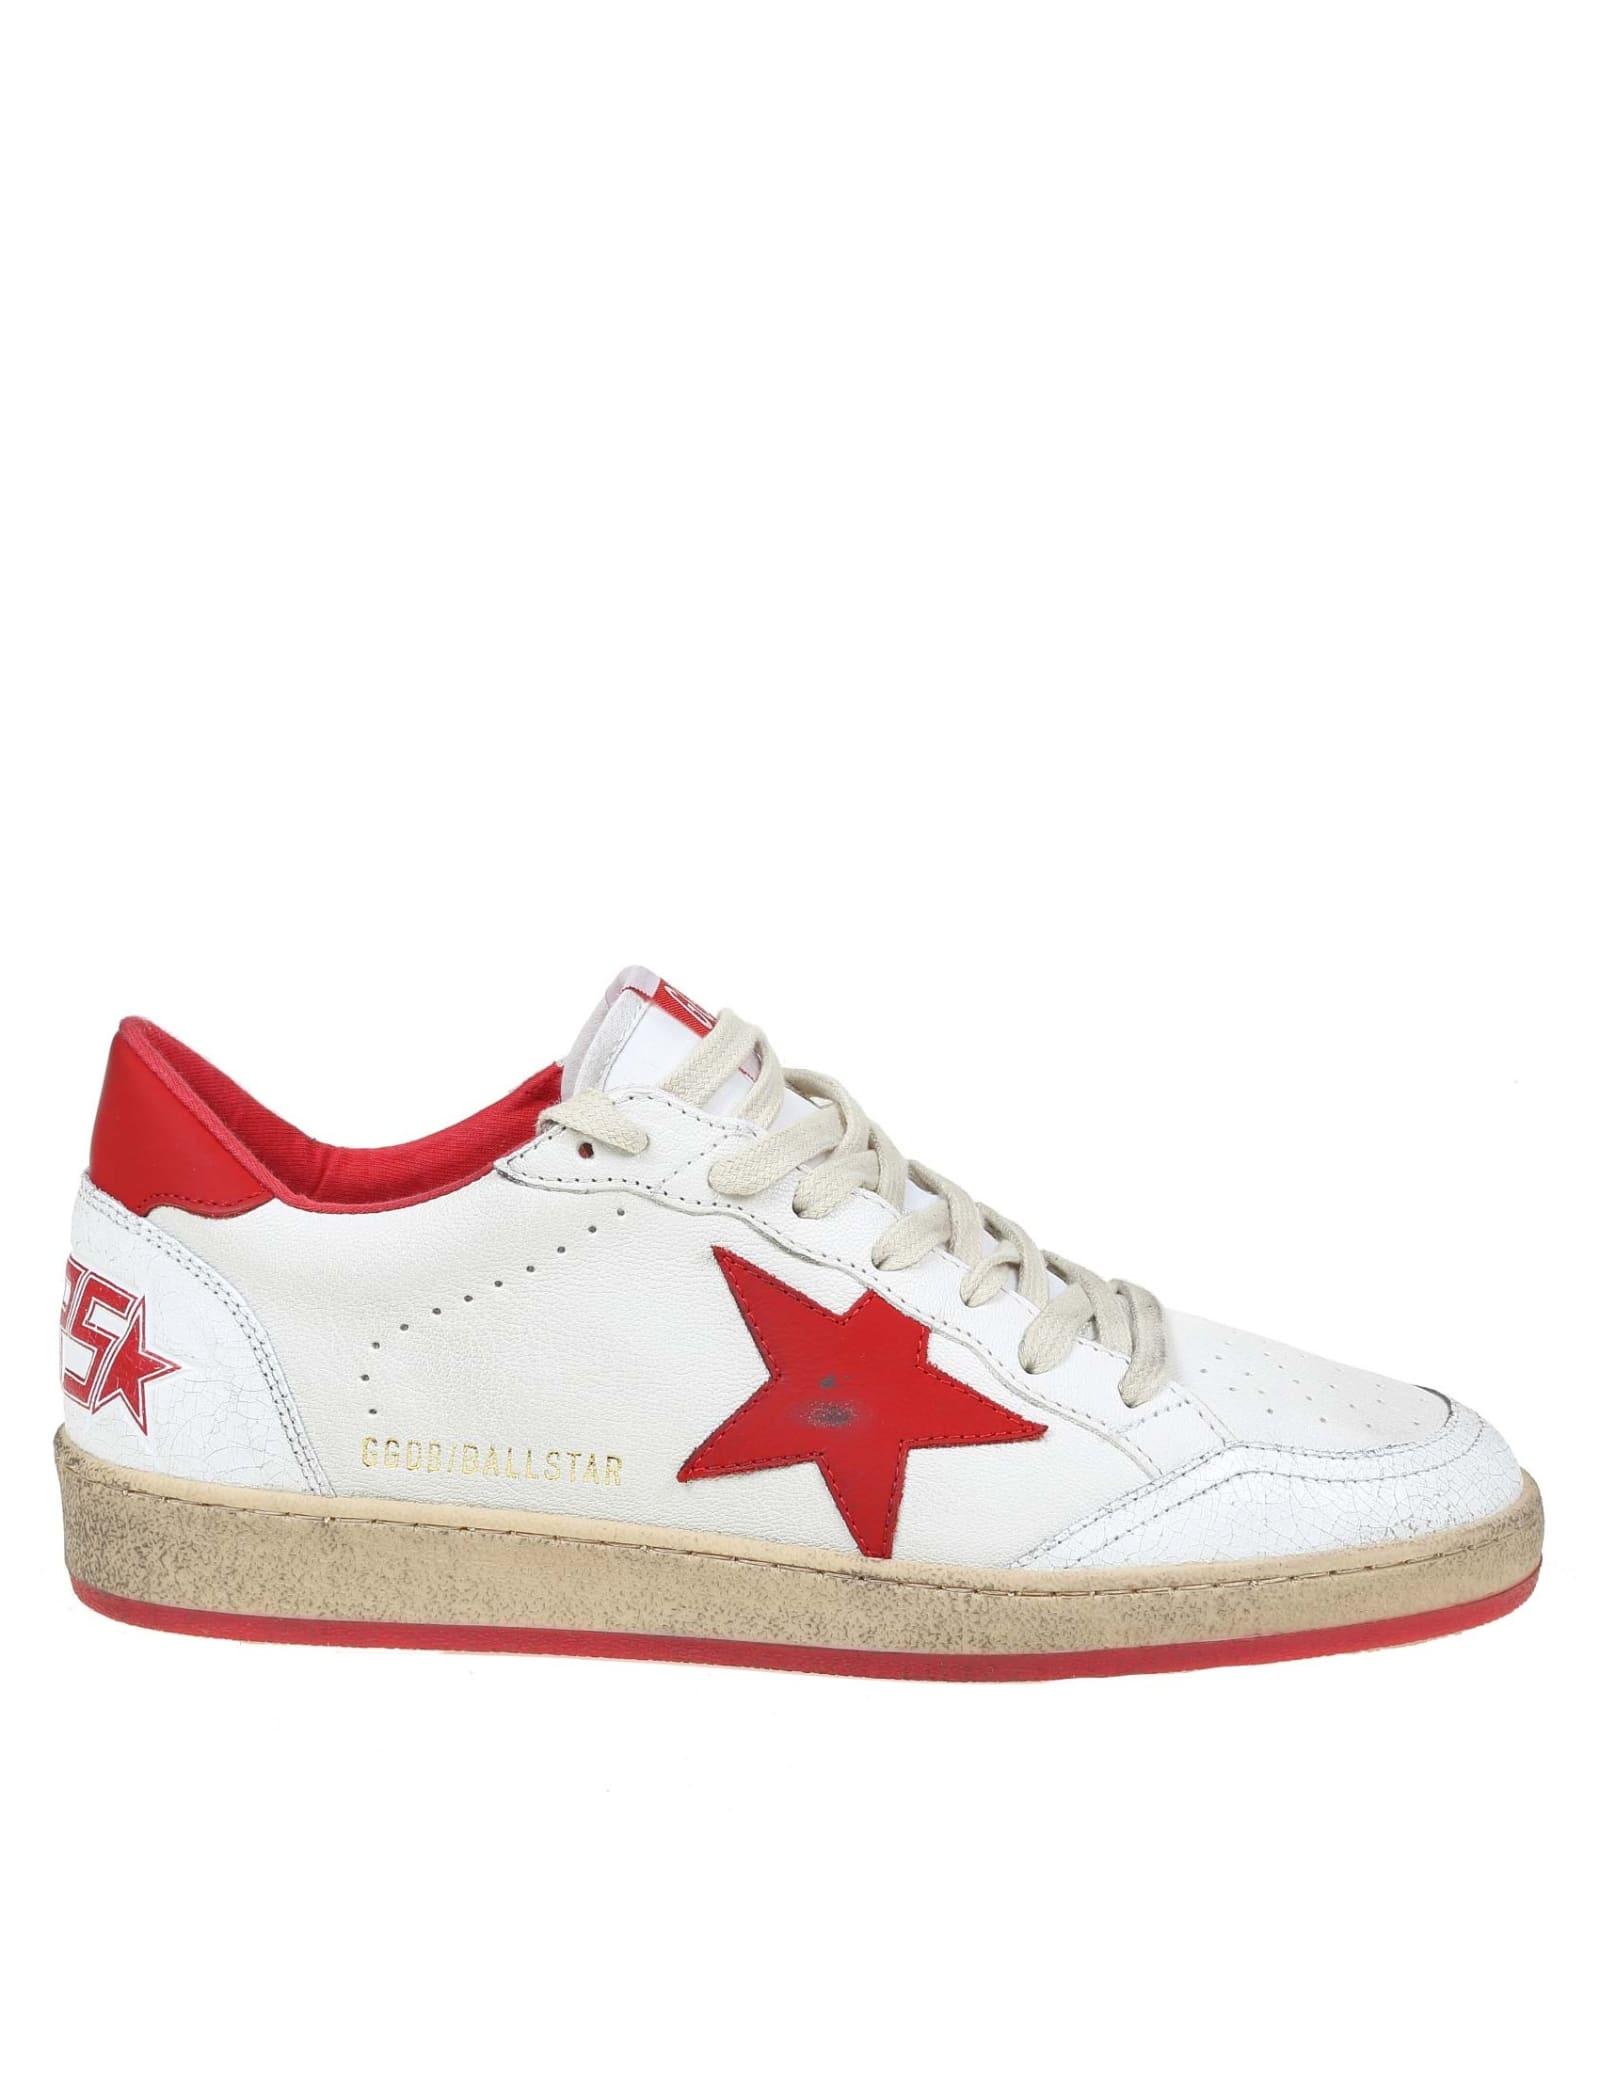 Golden Goose Ball Star Sneakers In White And Red Leather